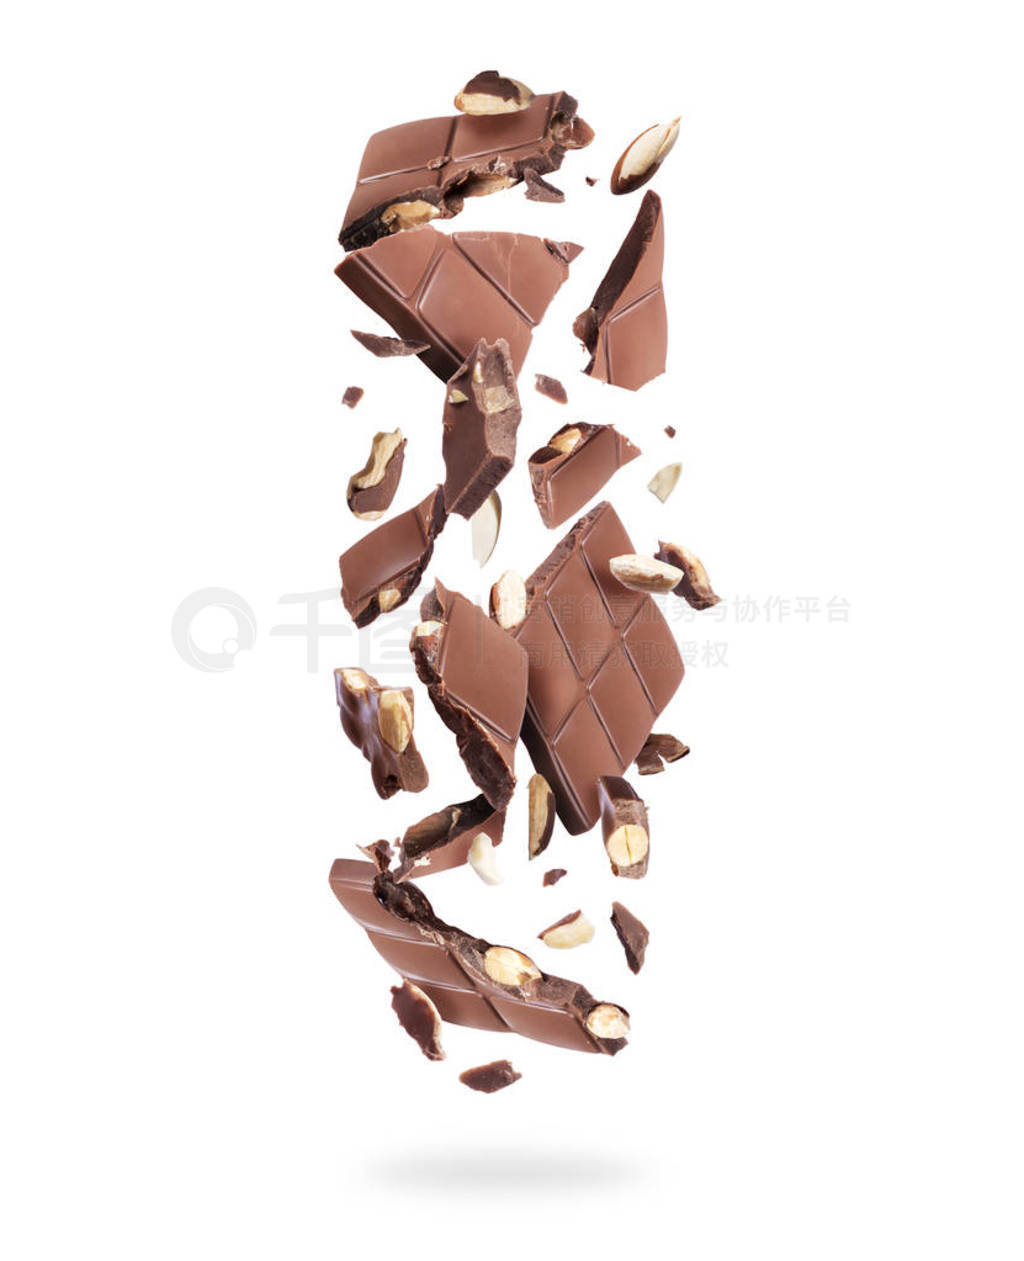 Pieces of broken chocolate falling down on white background